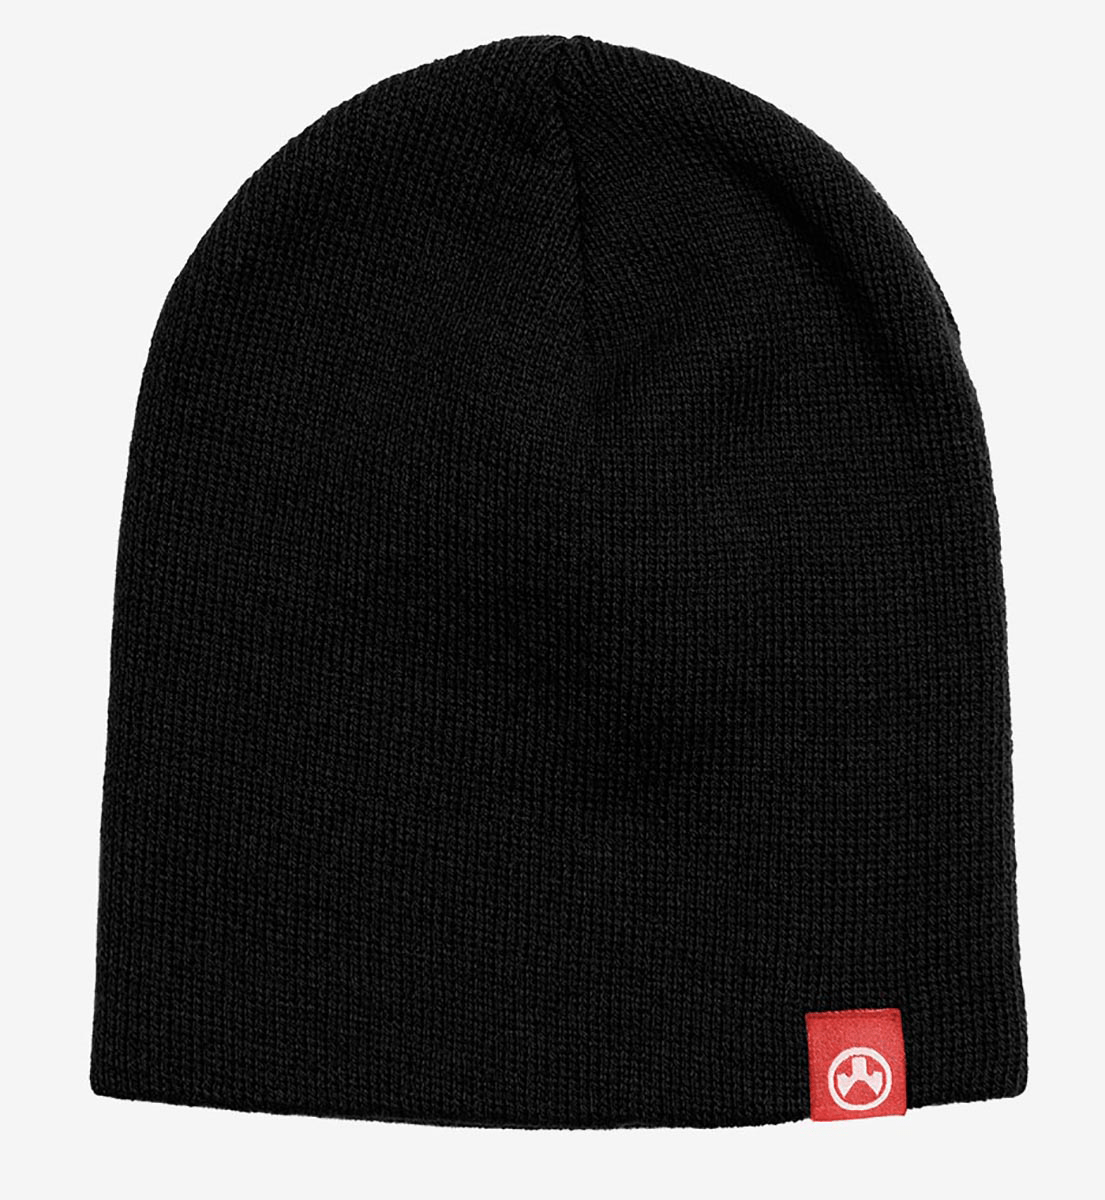 MAGPUL INDUSTRIES CORP Magpul Industries Corp Stretch Fit, Magpul Mag1150-001     Beanie                  Blk Accessories